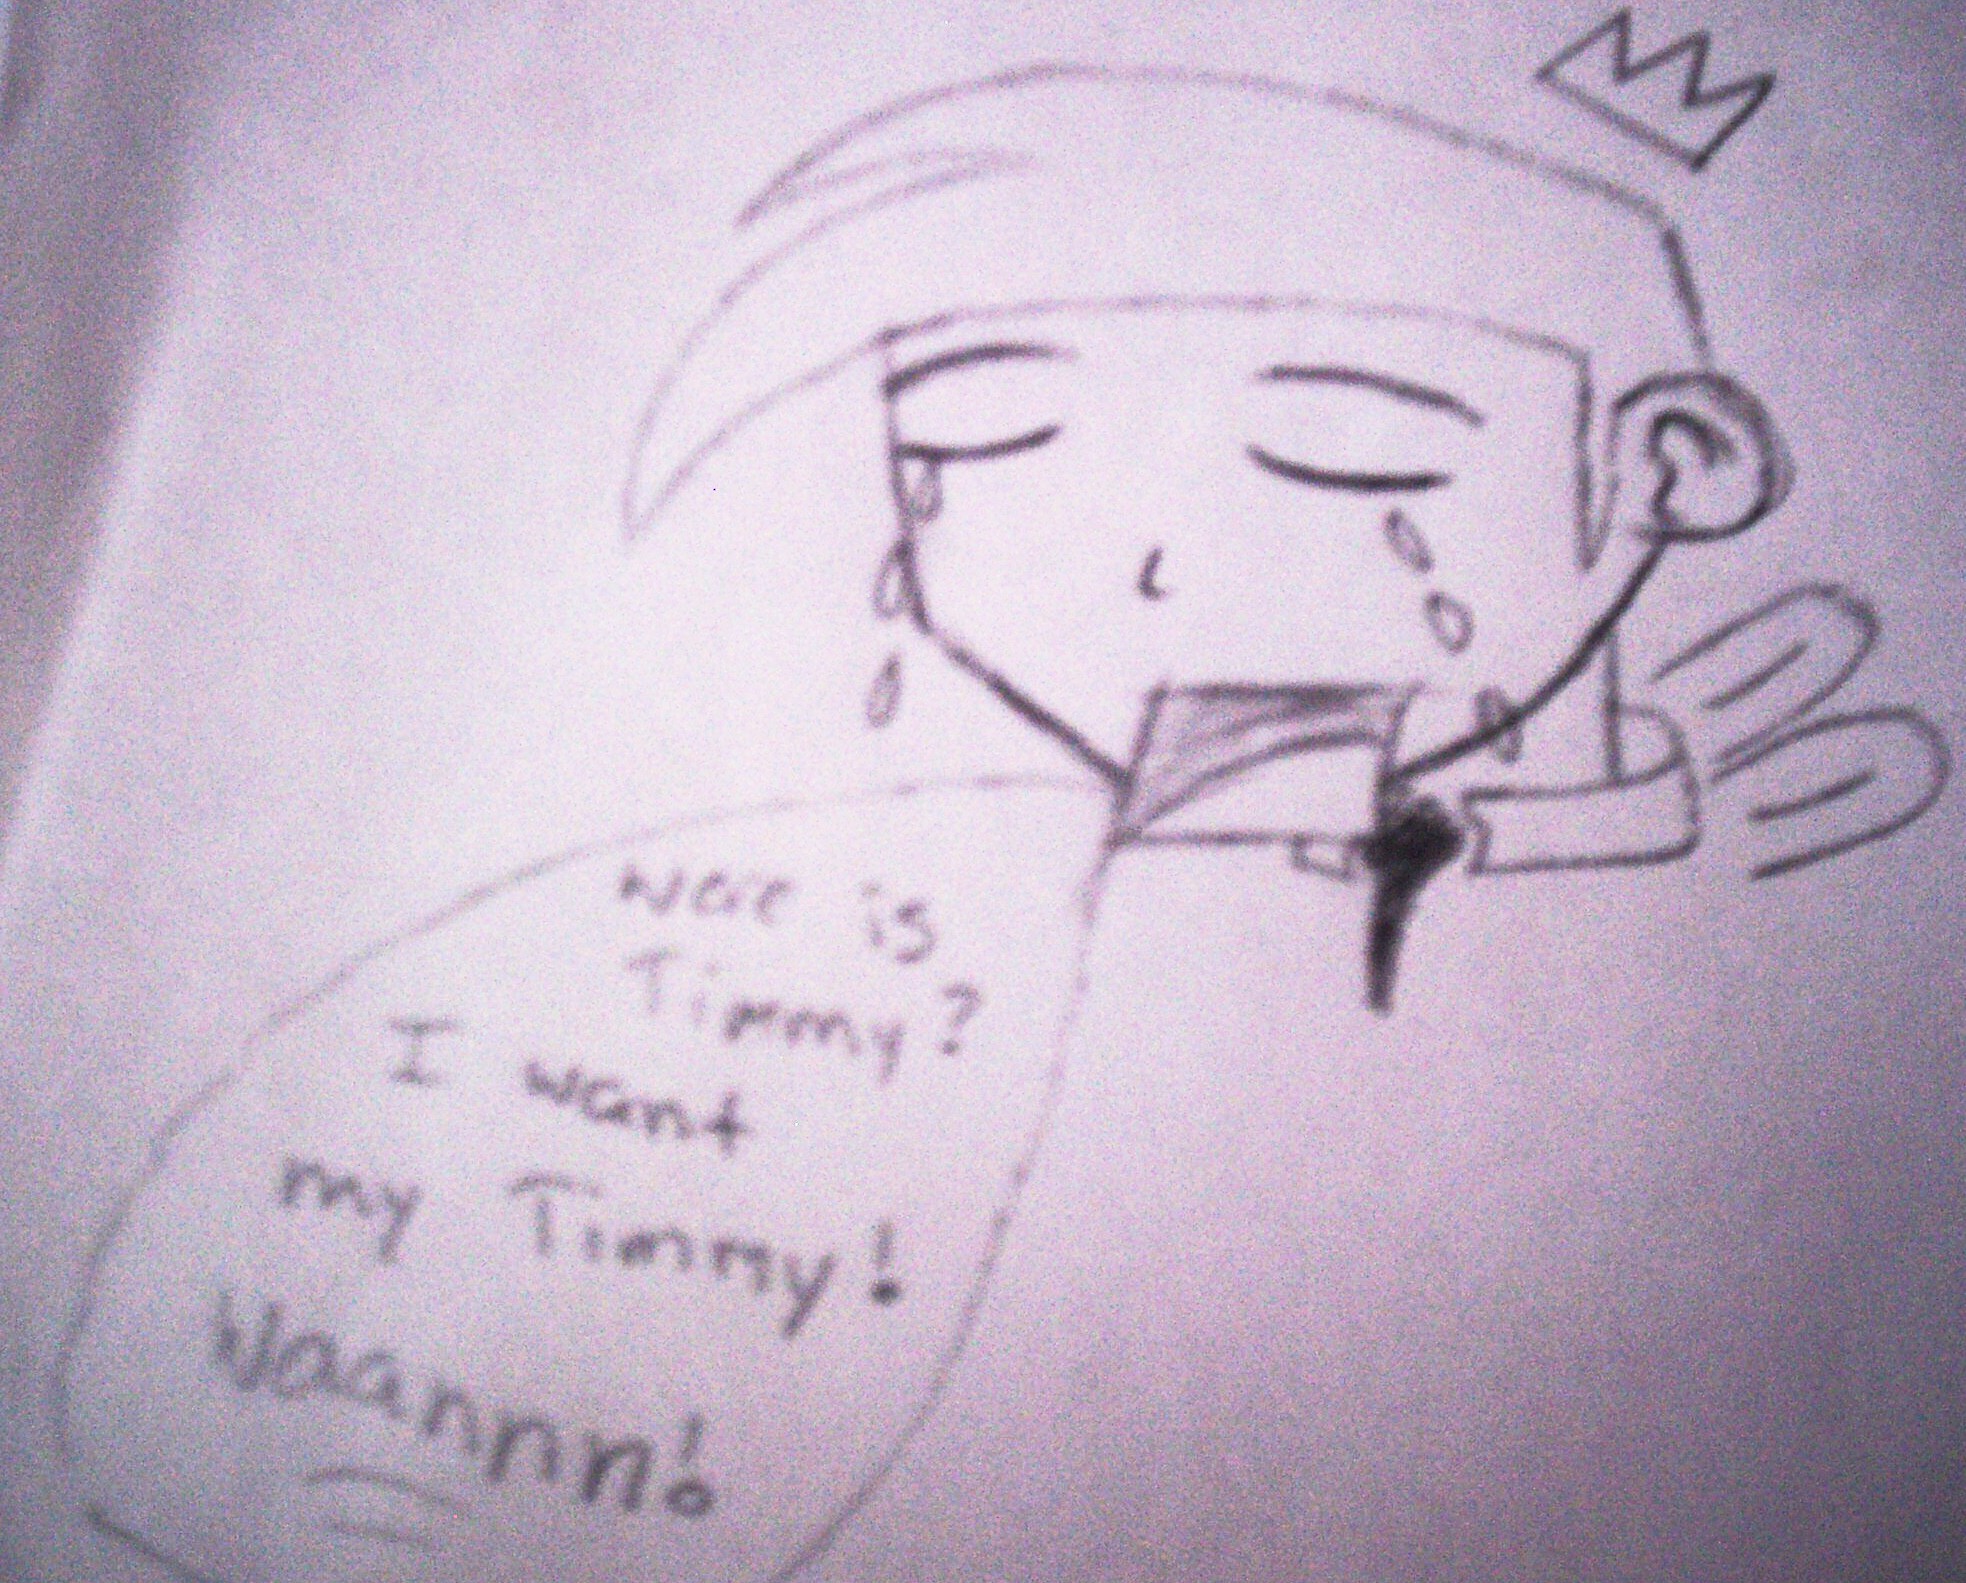 Where's Timmy??? by Icantdrawbutilltry